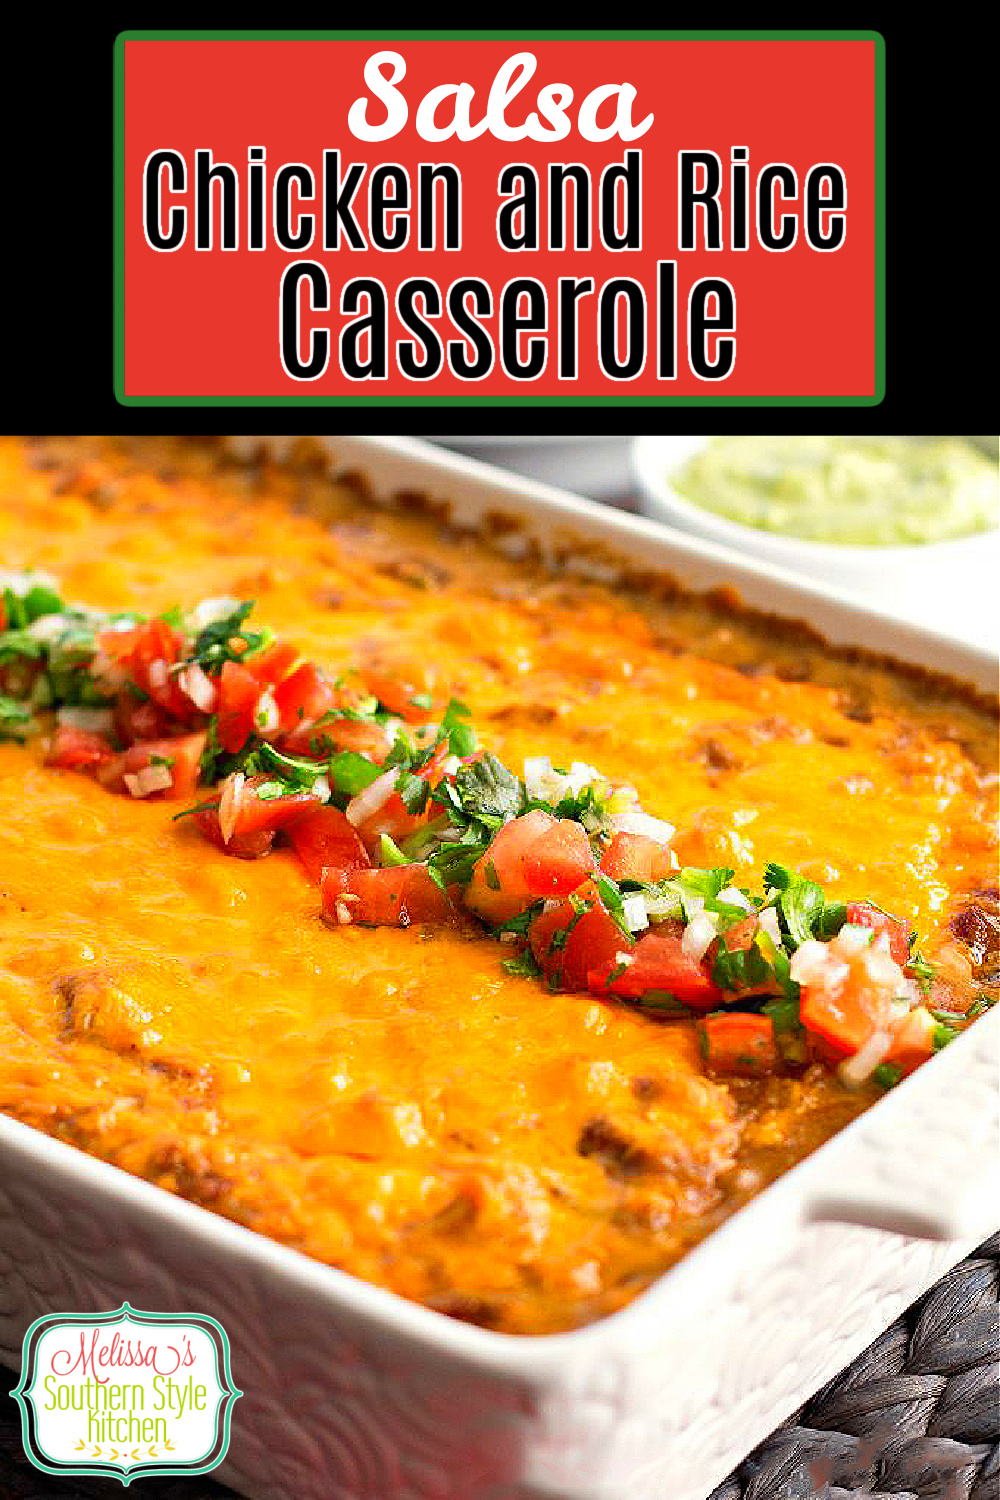 Mexican Salsa Chicken and Rice Casserole for a one dish homestyle fiesta #chickenandrice #chickencasseroles #mexicanchicken #salsachicken #easychickenrecipes #casseroles #southernfood #southernrecipes #dinnerideas